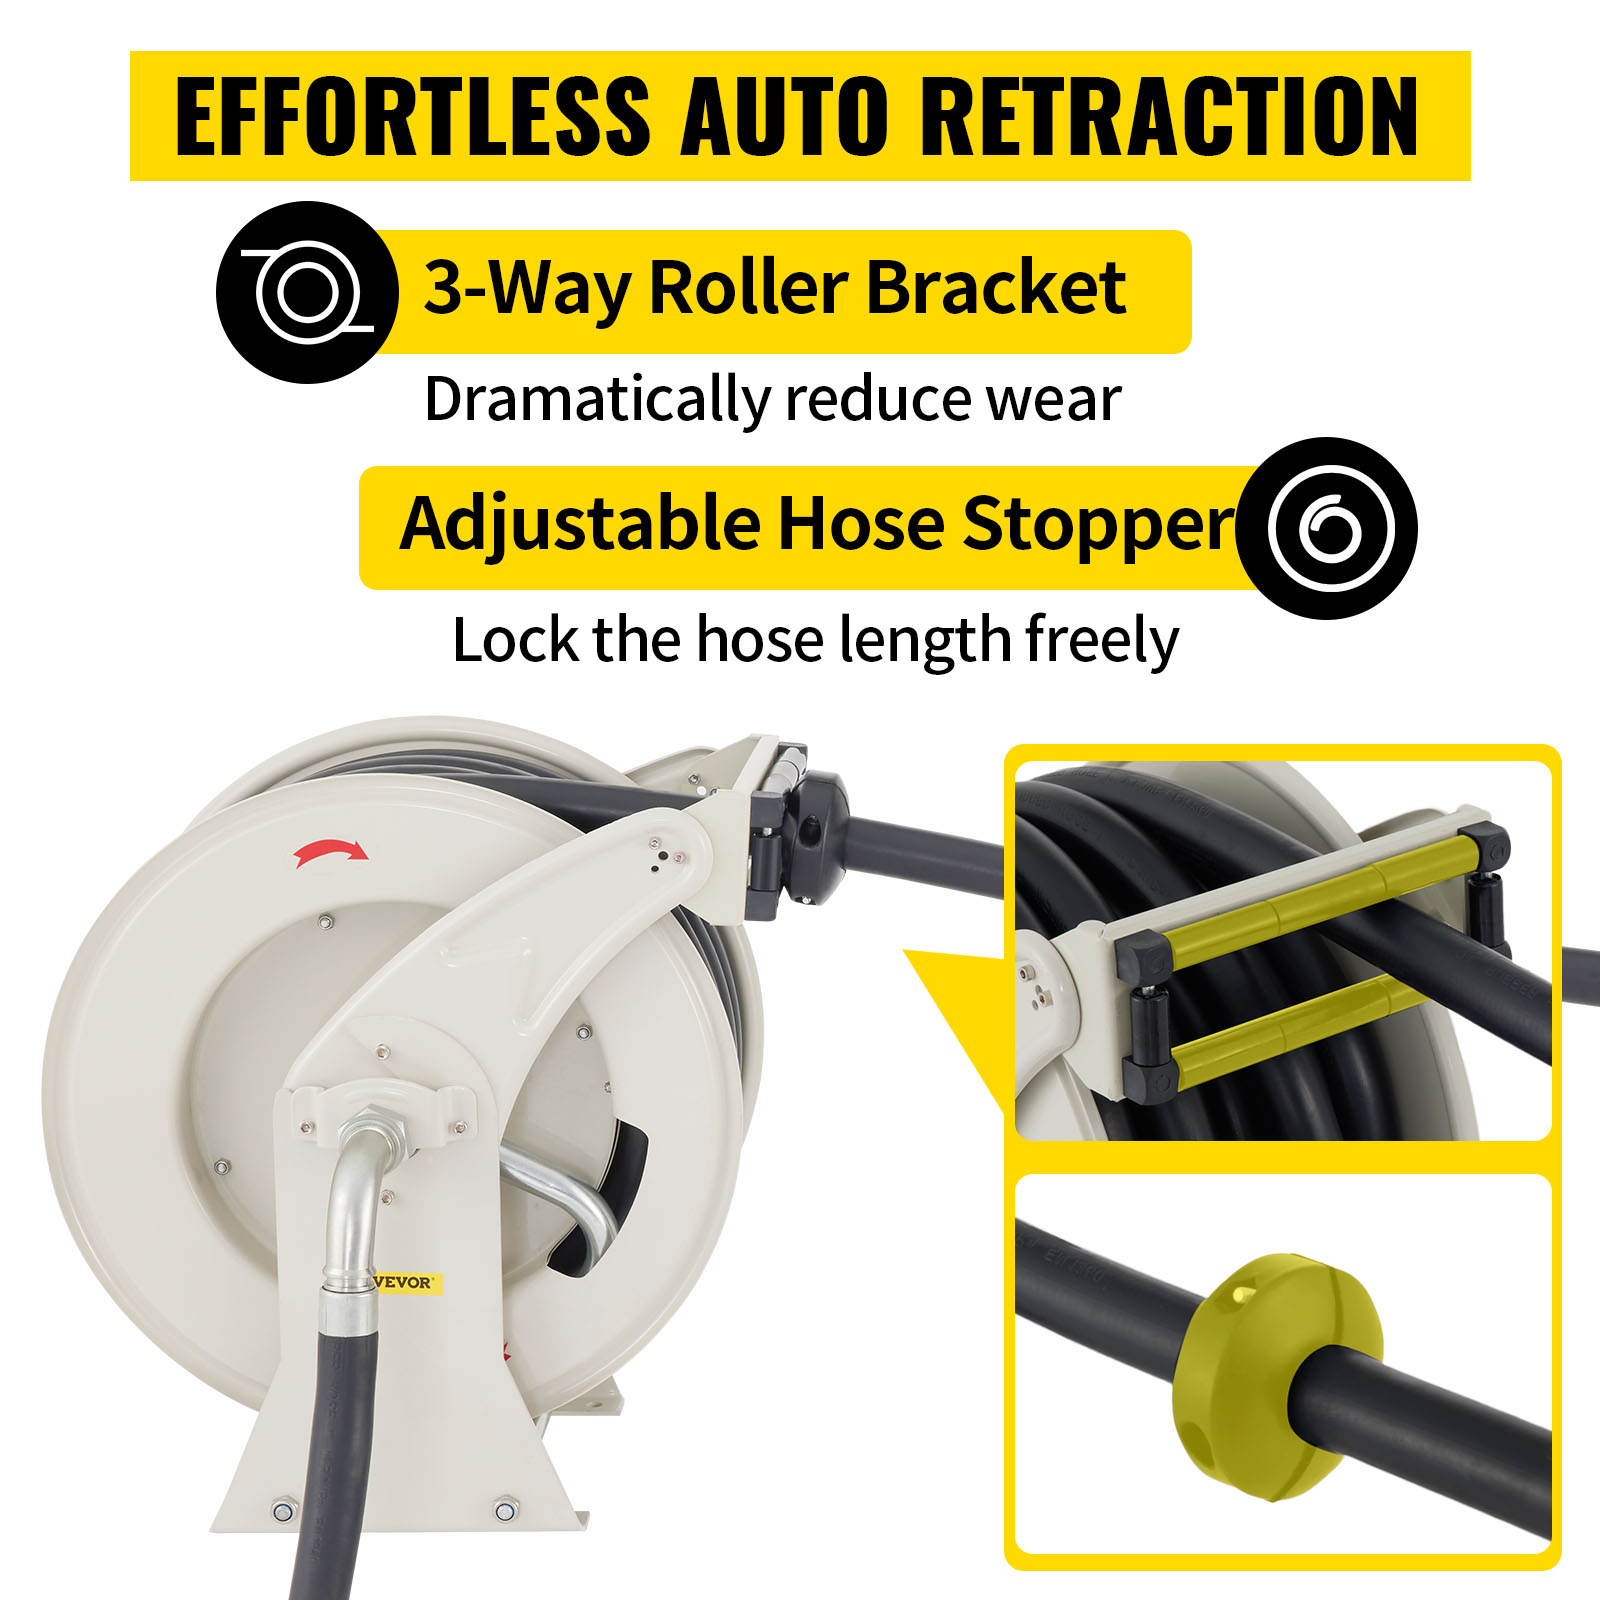 Maximize Convenience with the Inexpensive VEVOR Retractable Air Hose Reel 